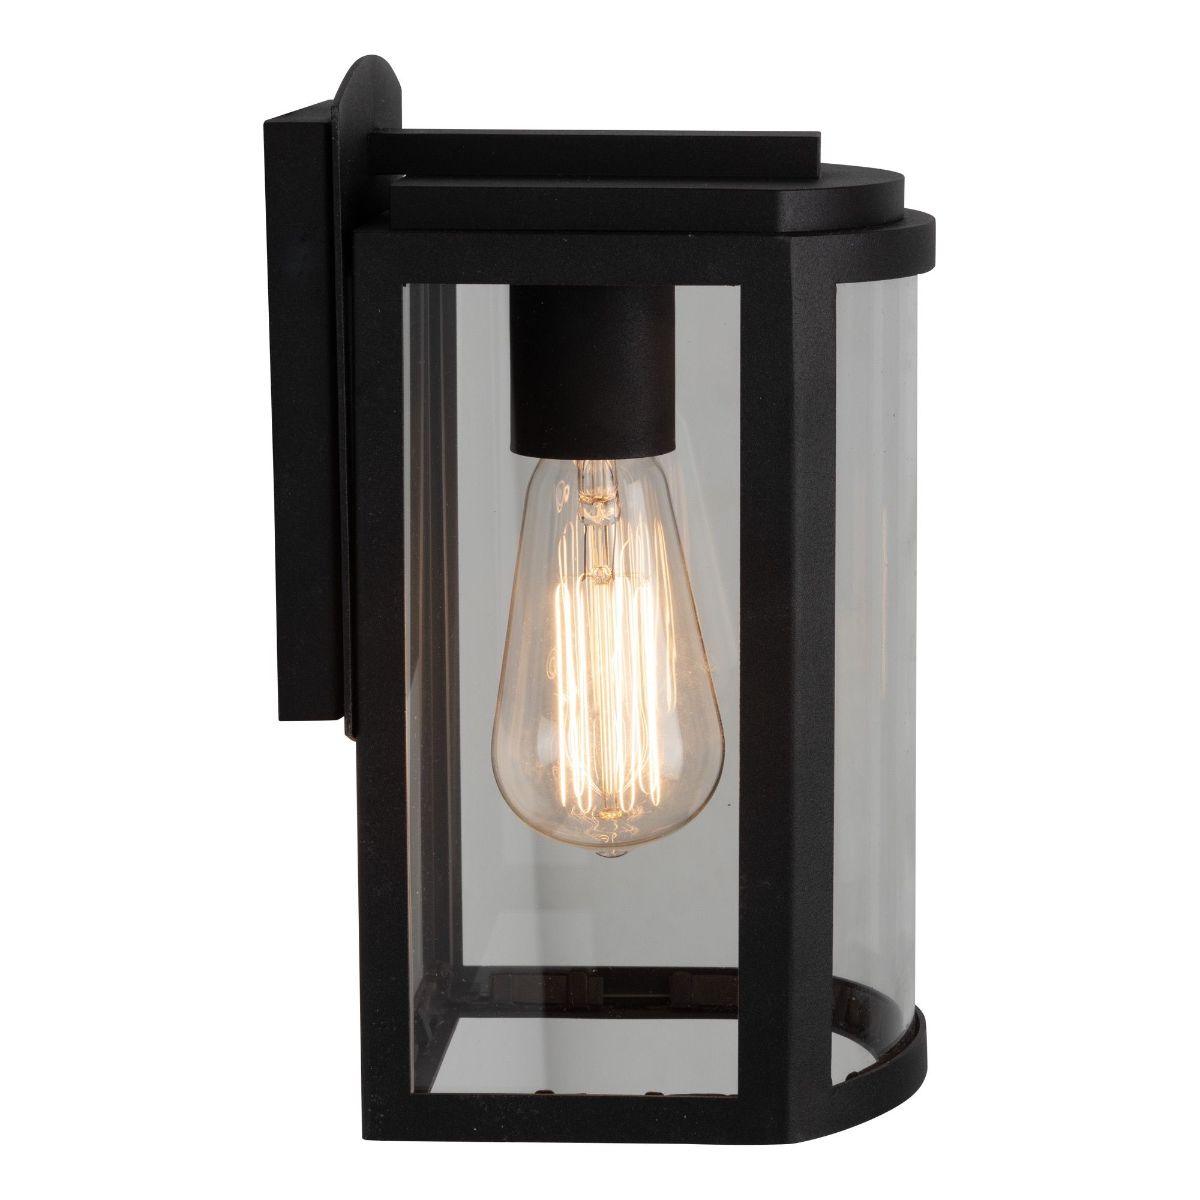 Lakewood 10 In. Outdoor Wall Light Matte Black Finish